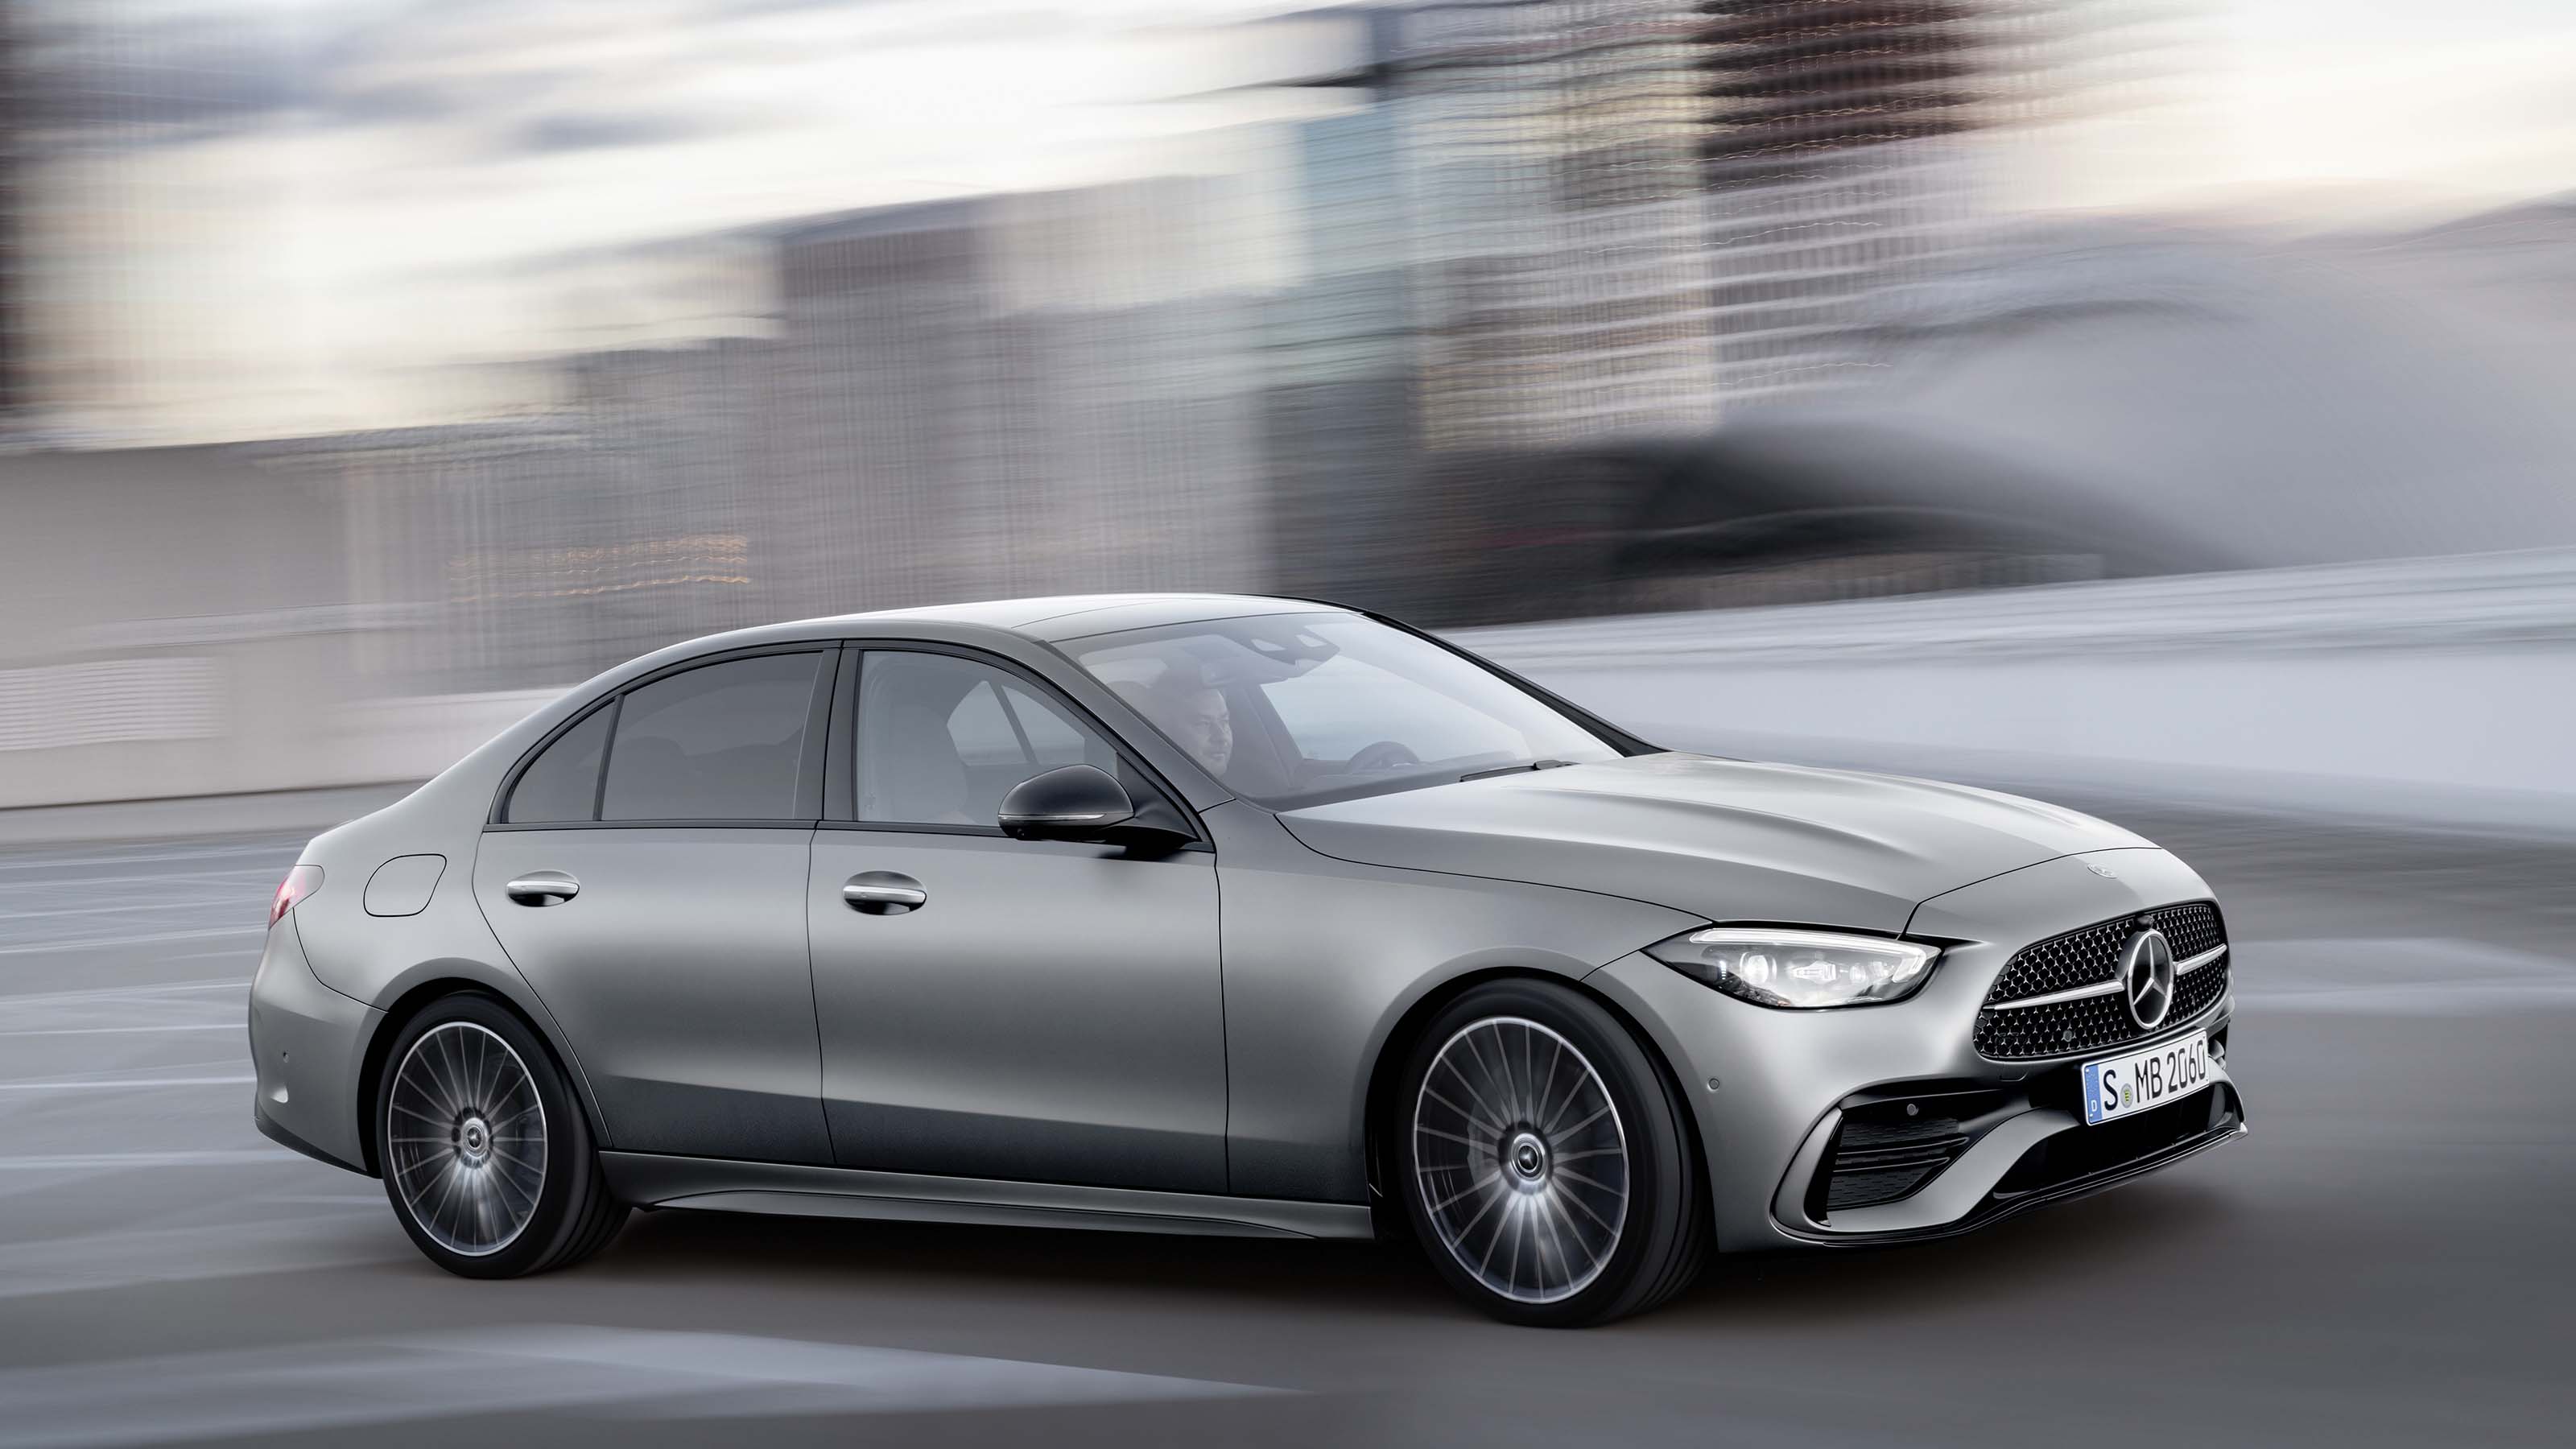 New 21 Mercedes C Class Hybrids Revealed Drivingelectric